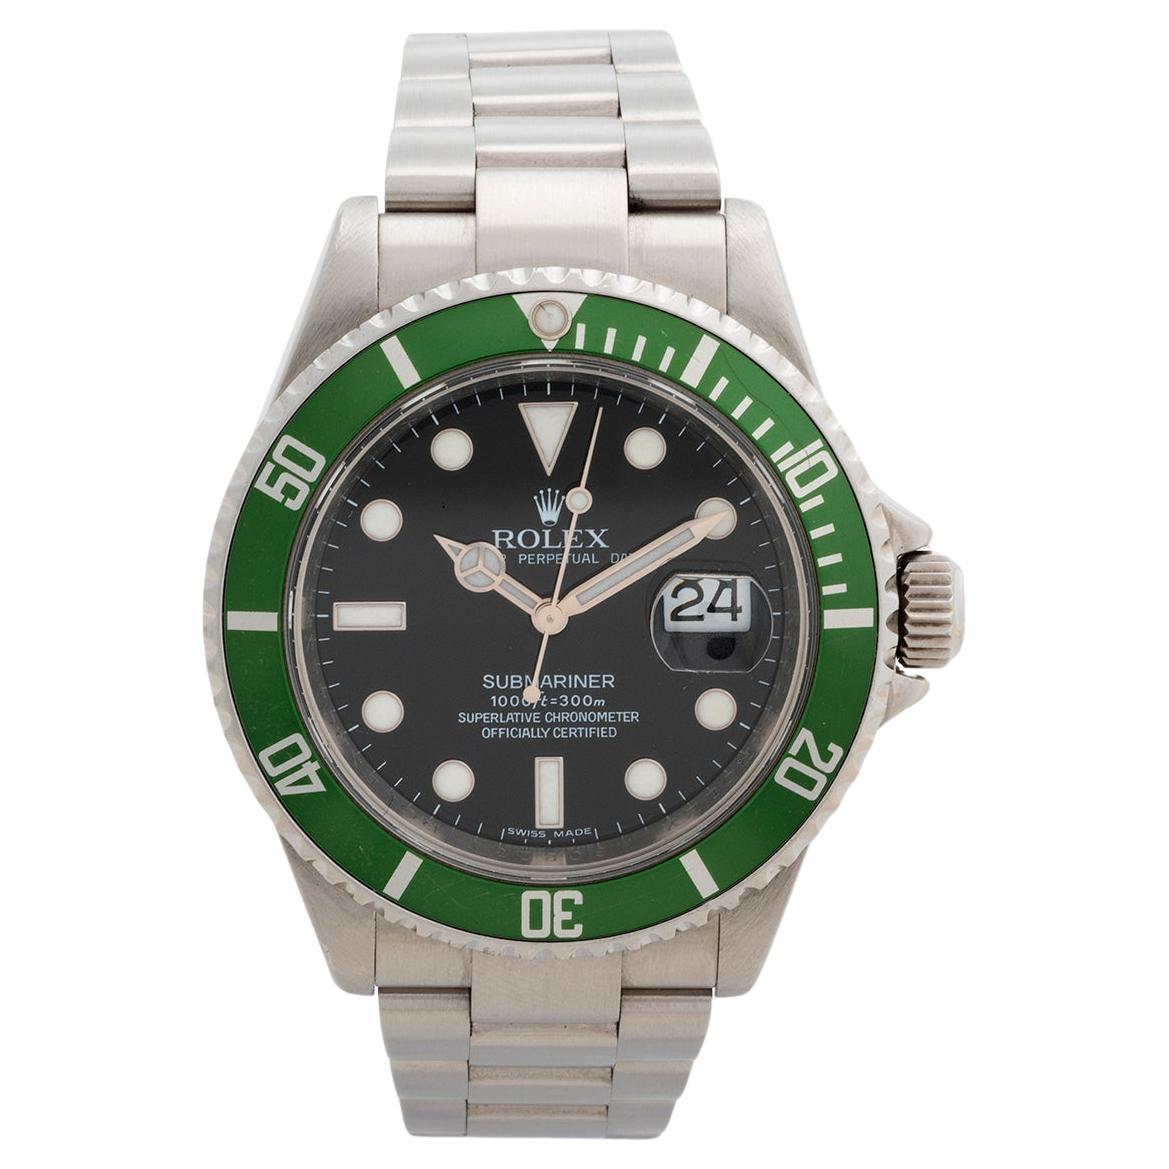 Does Rolex make a red Submariner?